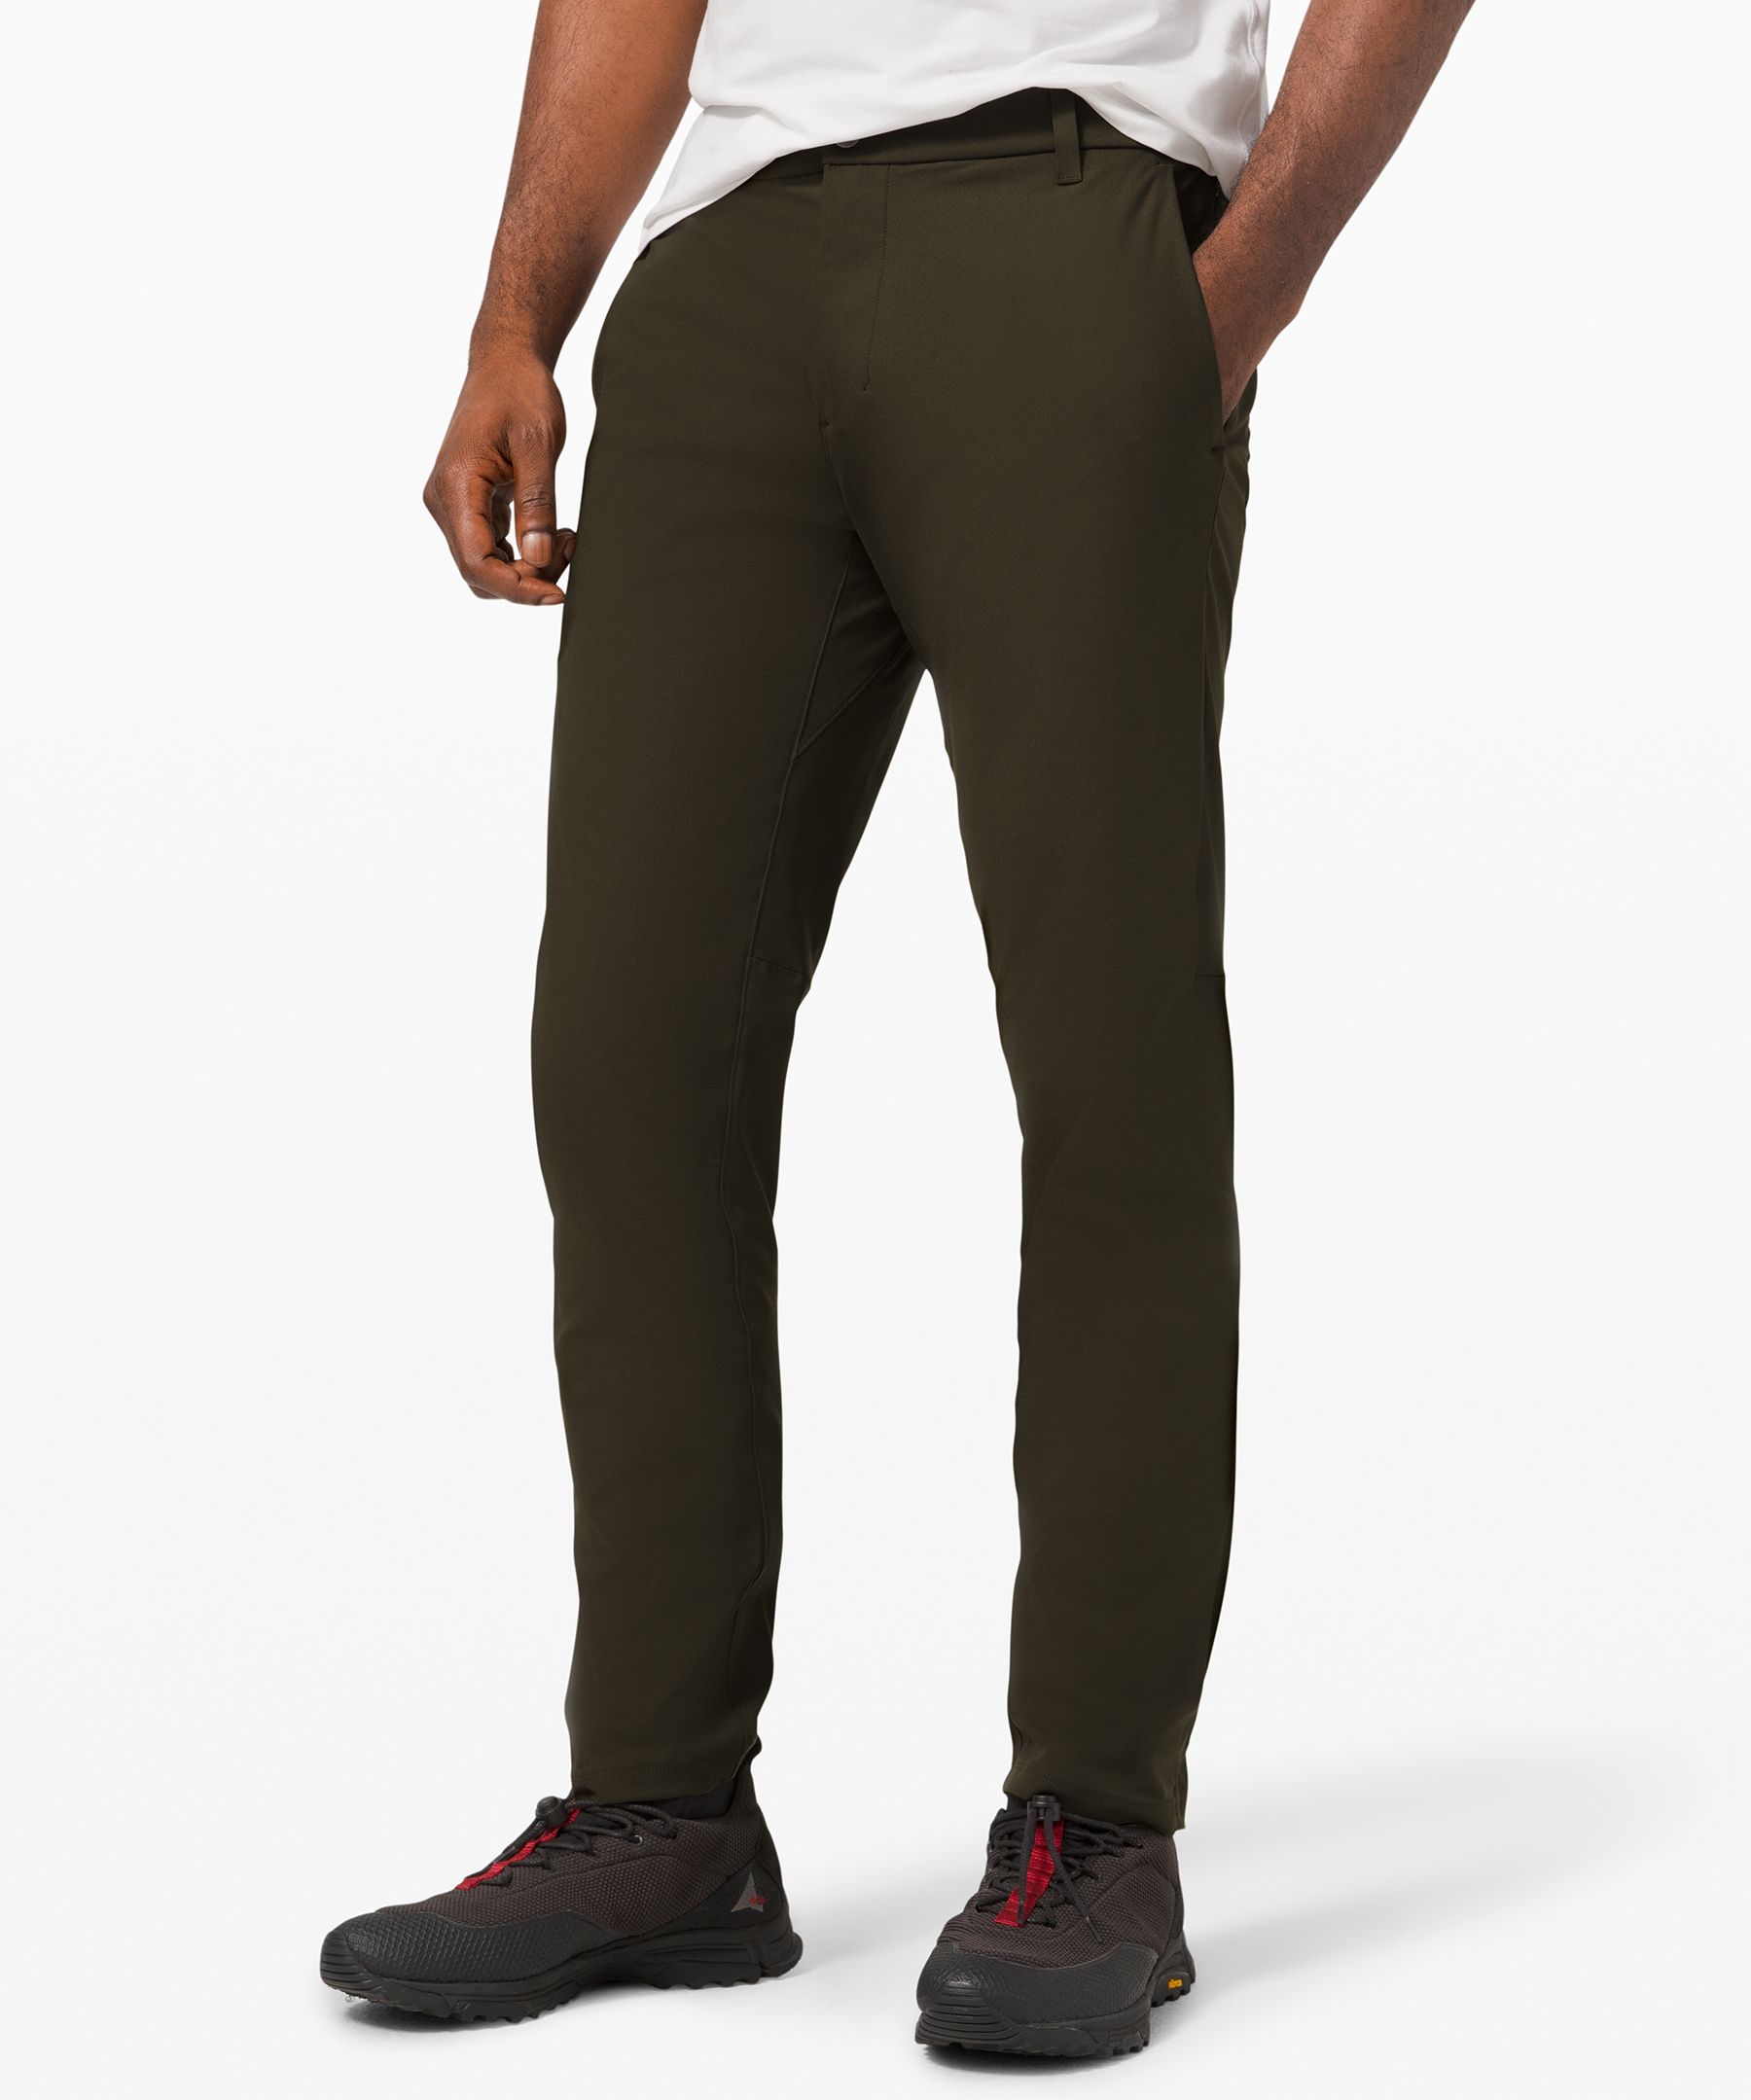 Lululemon Abc Pants Review Reddit News  International Society of Precision  Agriculture